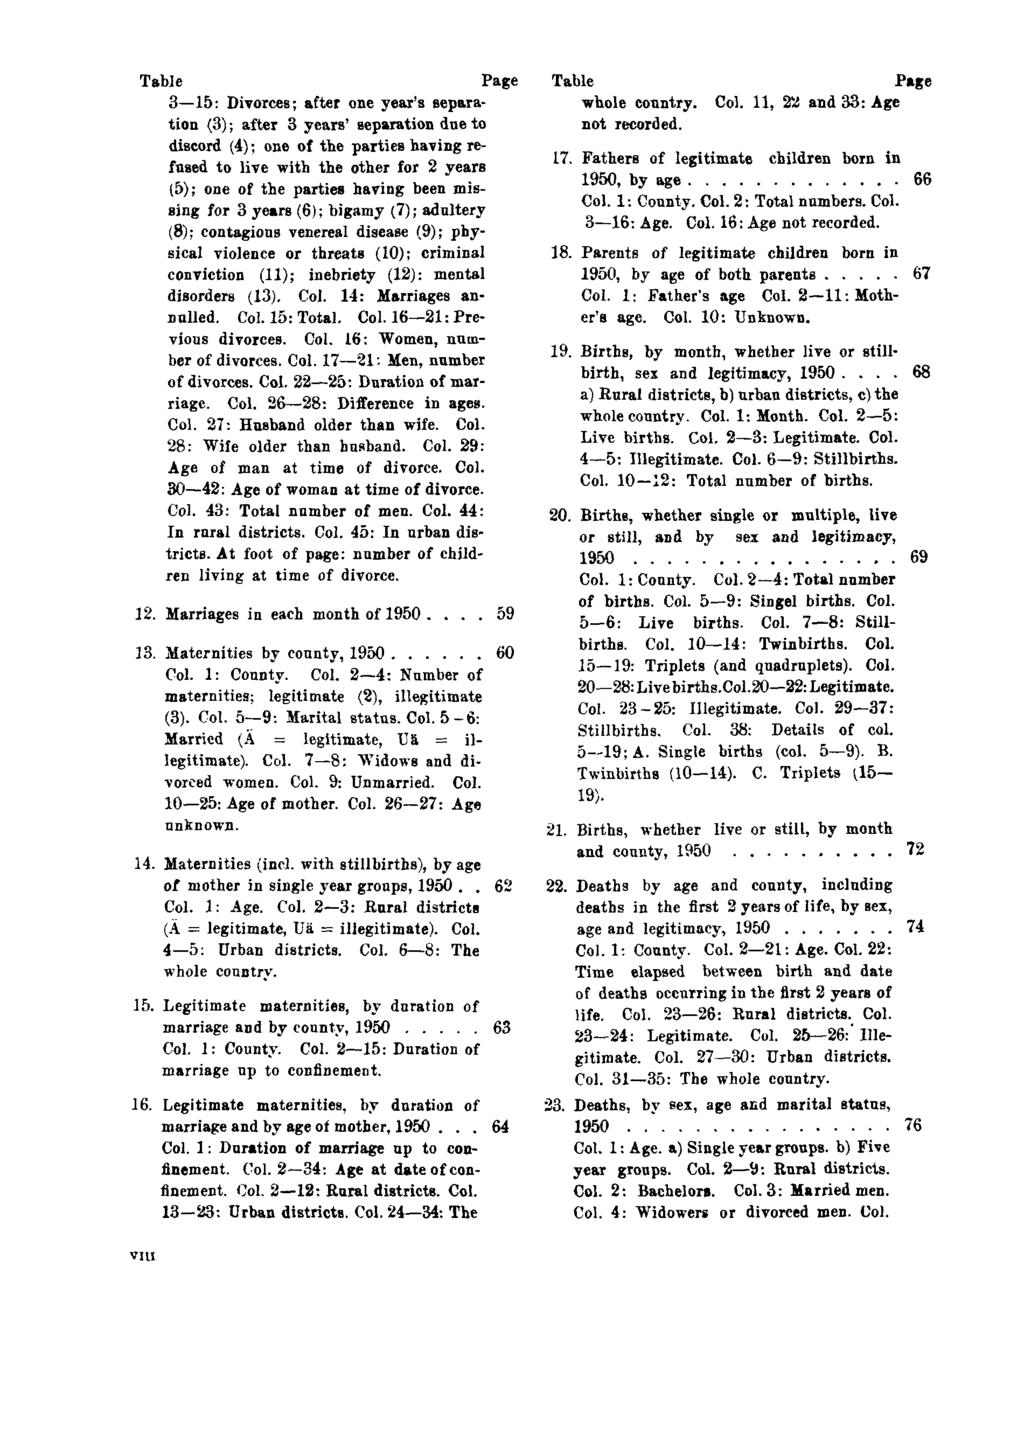 Table Page 3 15: Divorces; after one year's separation (3); after 3 years' separation due to discord (4); one of the parties having refused to live with the other for 2 years (5); one of the parties